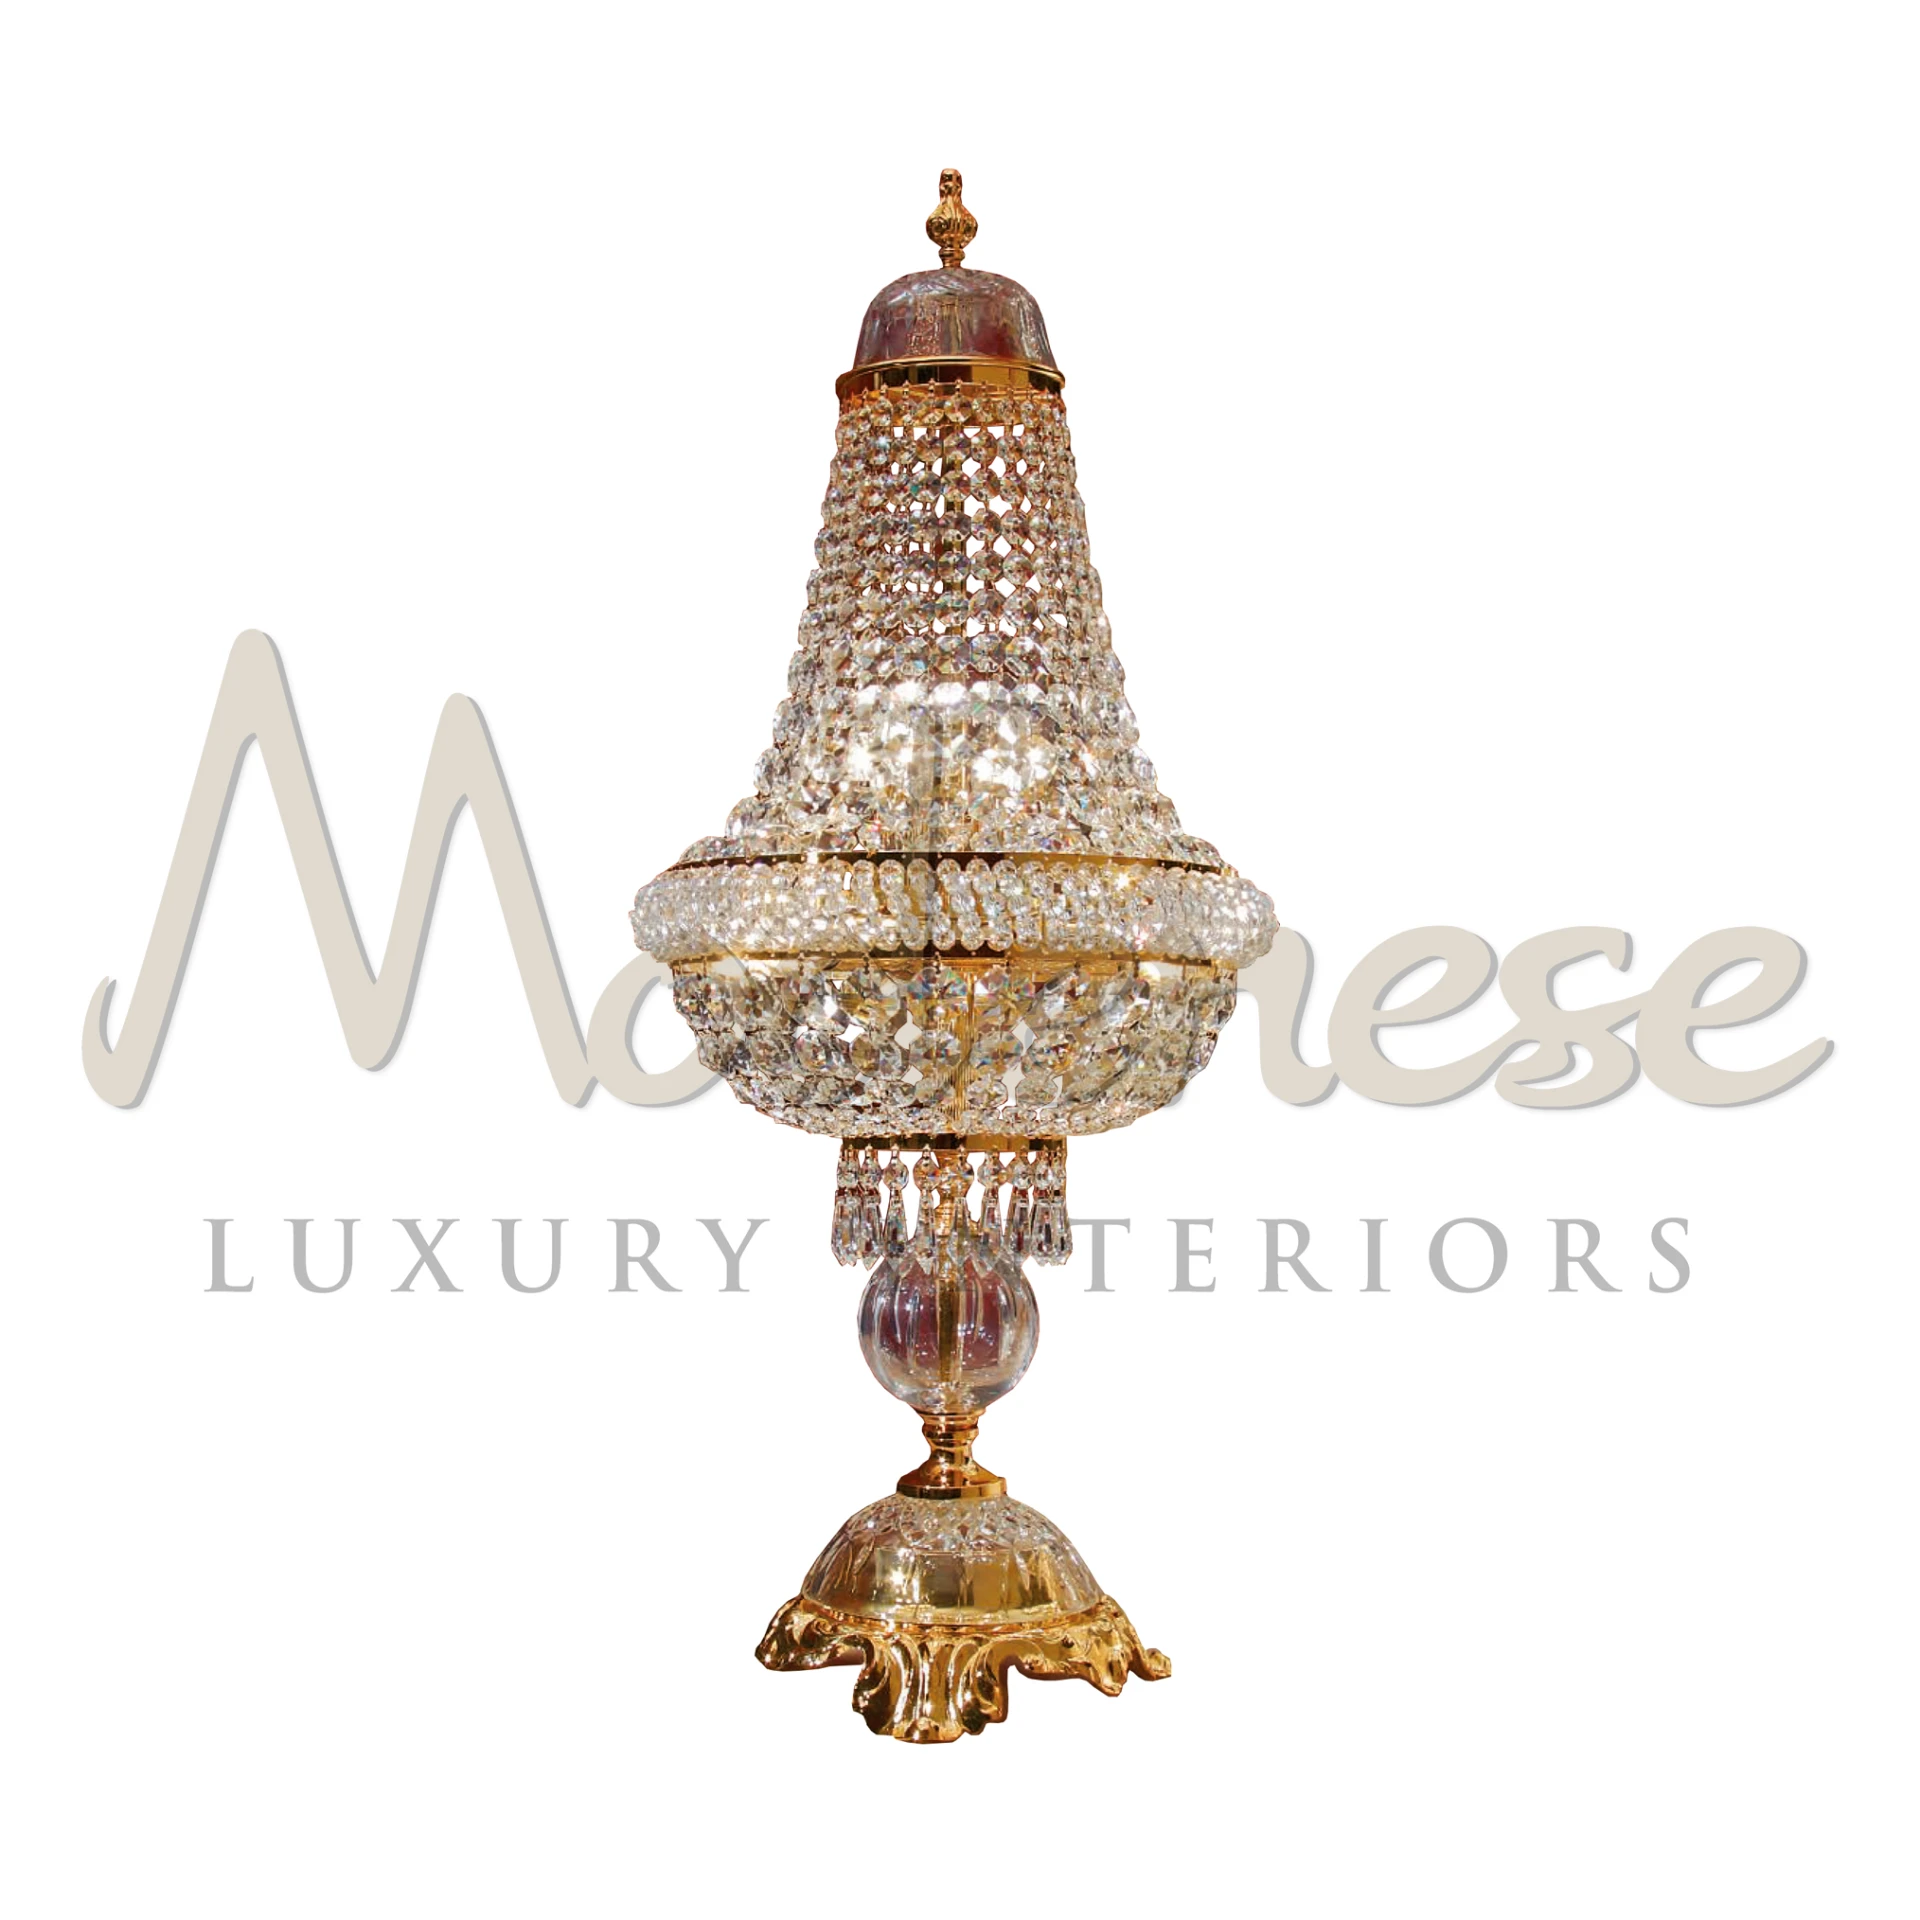 Glamorous Luxury Crystal Lamp with intricate crystal work and a lavish golden base.